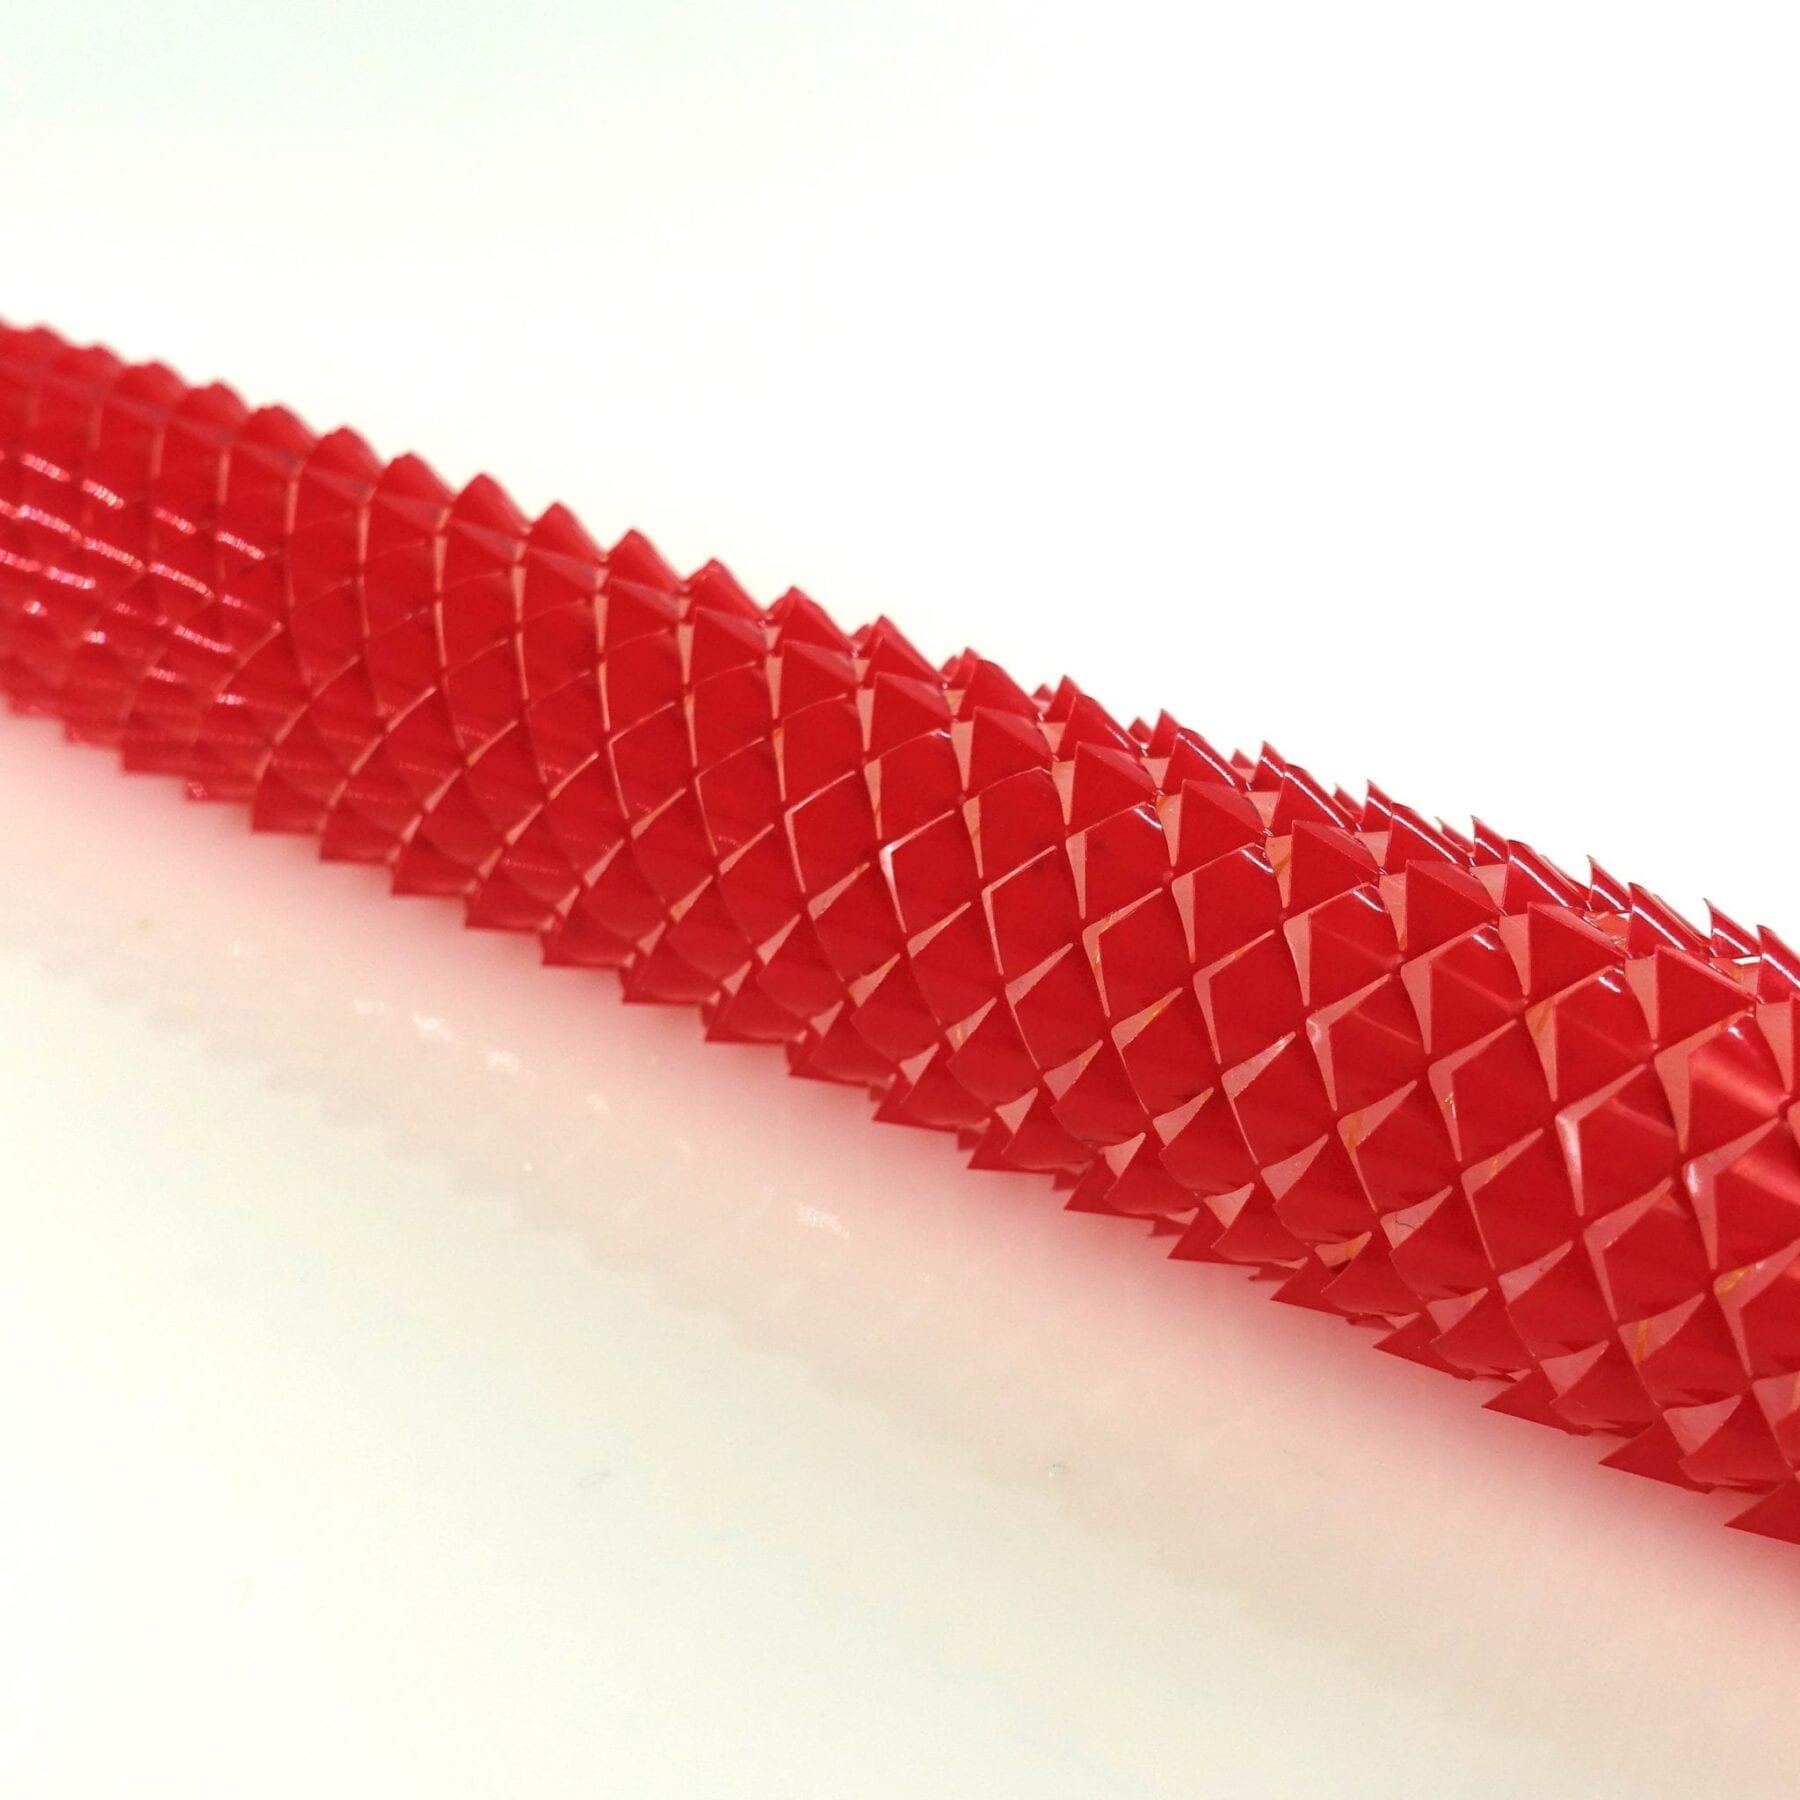 Snake-inspired robot is able to crawl without any rigid parts